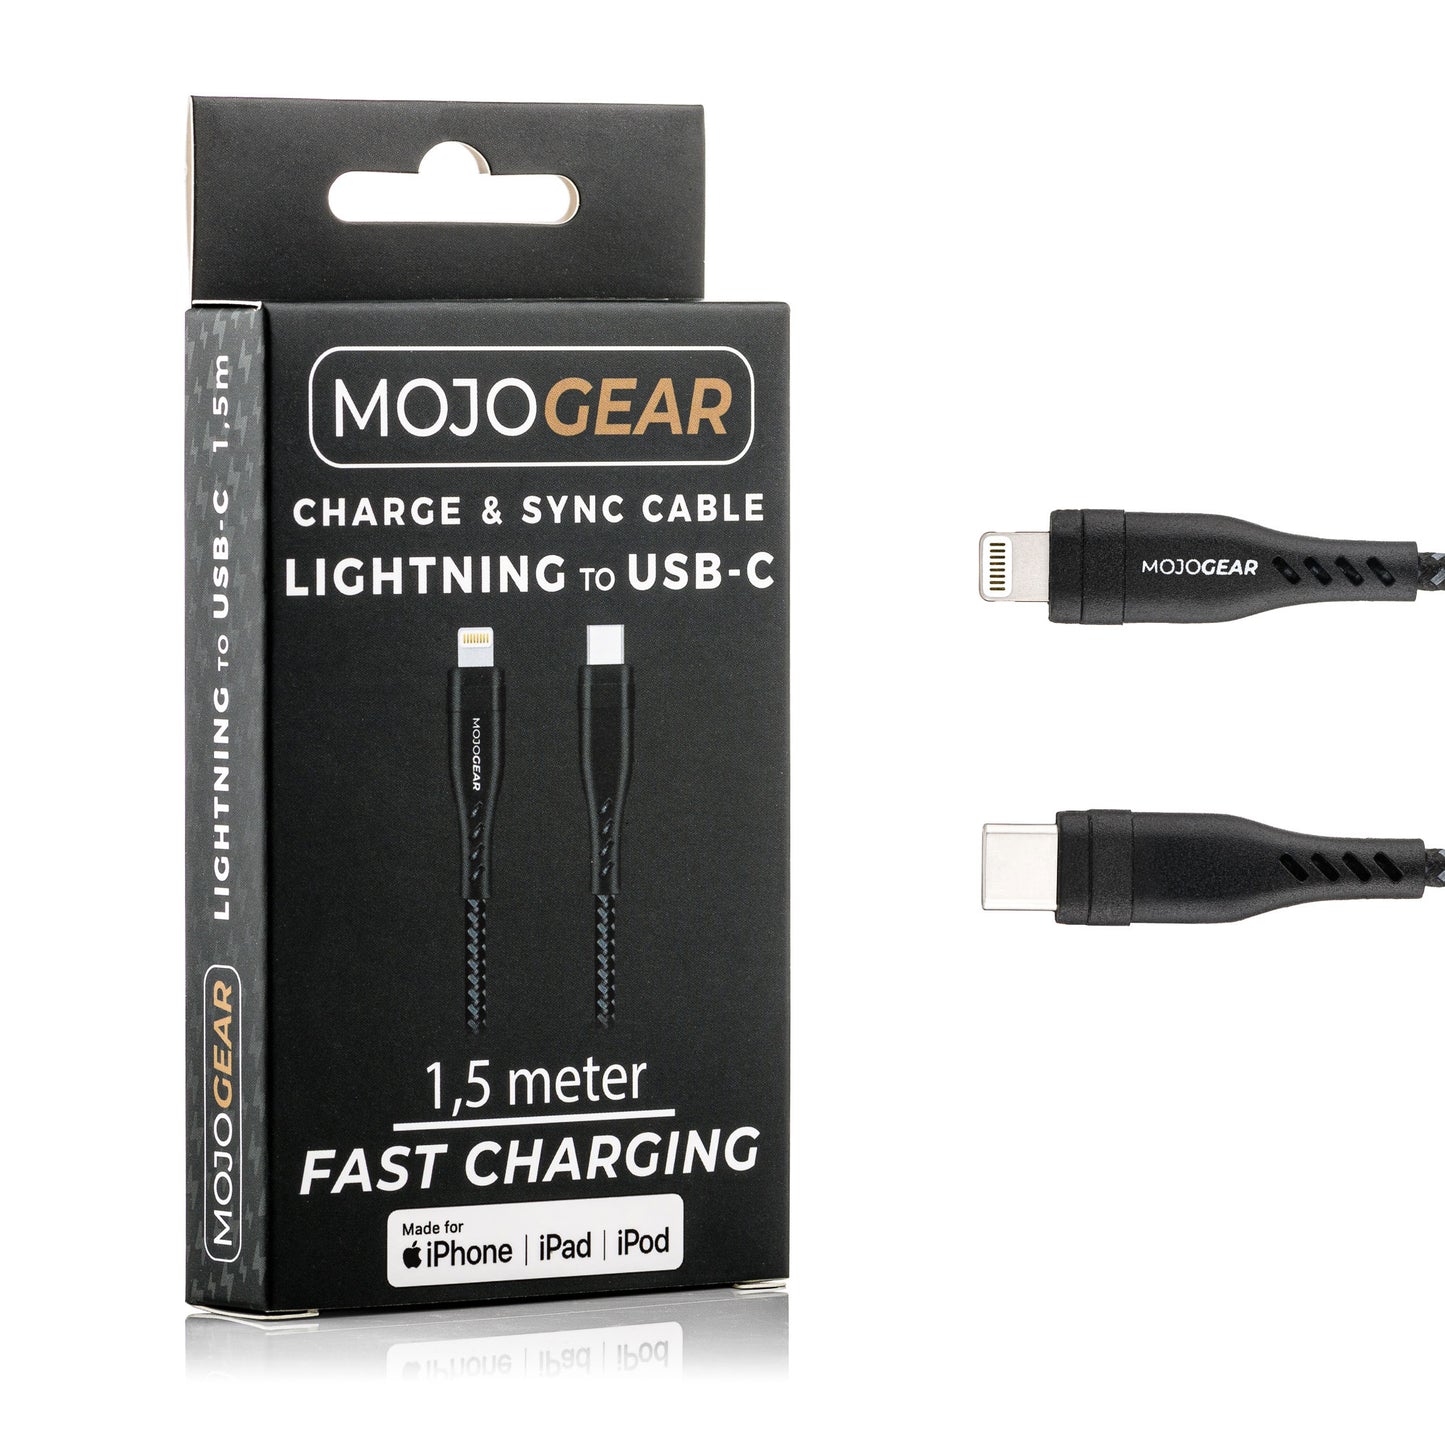 MOJOGEAR Fast Charging set for iPhone and iPad: 20.000 mAh Extra Fast power bank + Lightning to USB-C cable